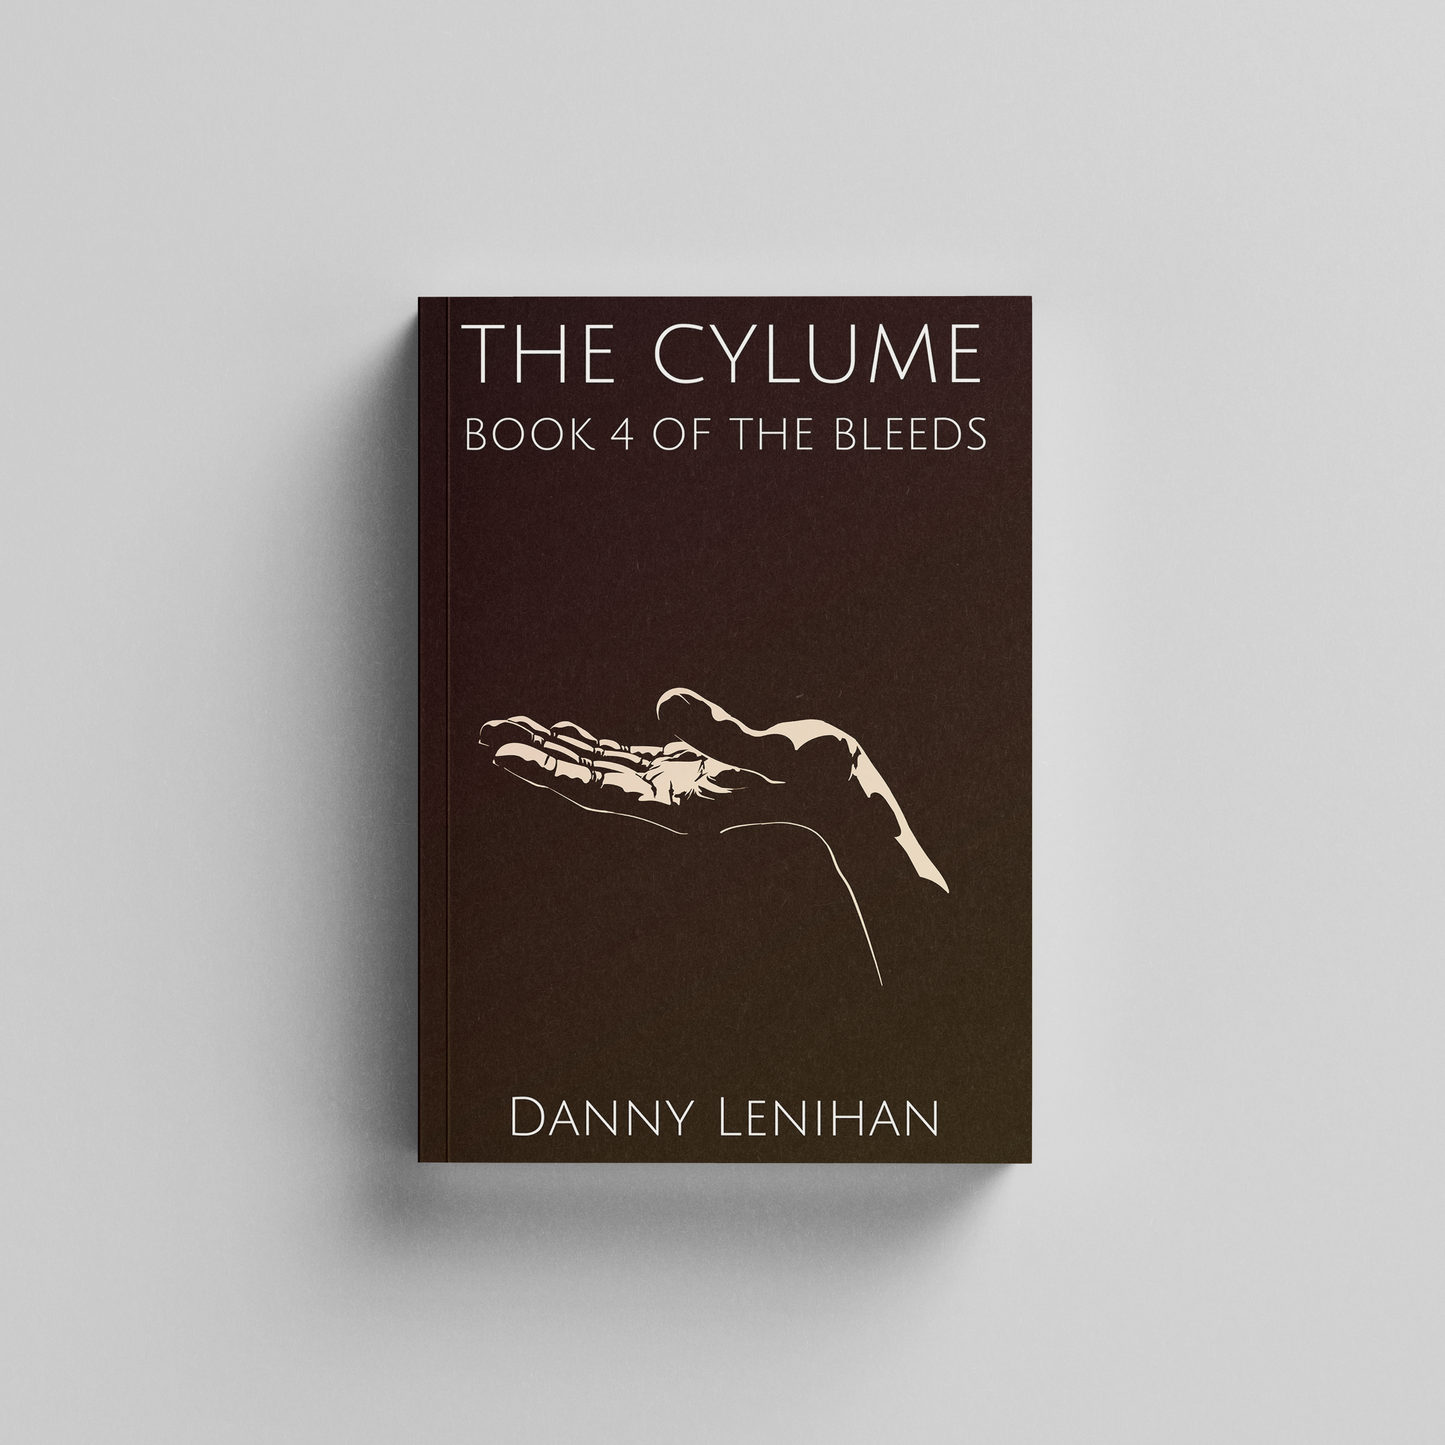 The Cylume: Book 4 of The Bleeds - eBook Edition